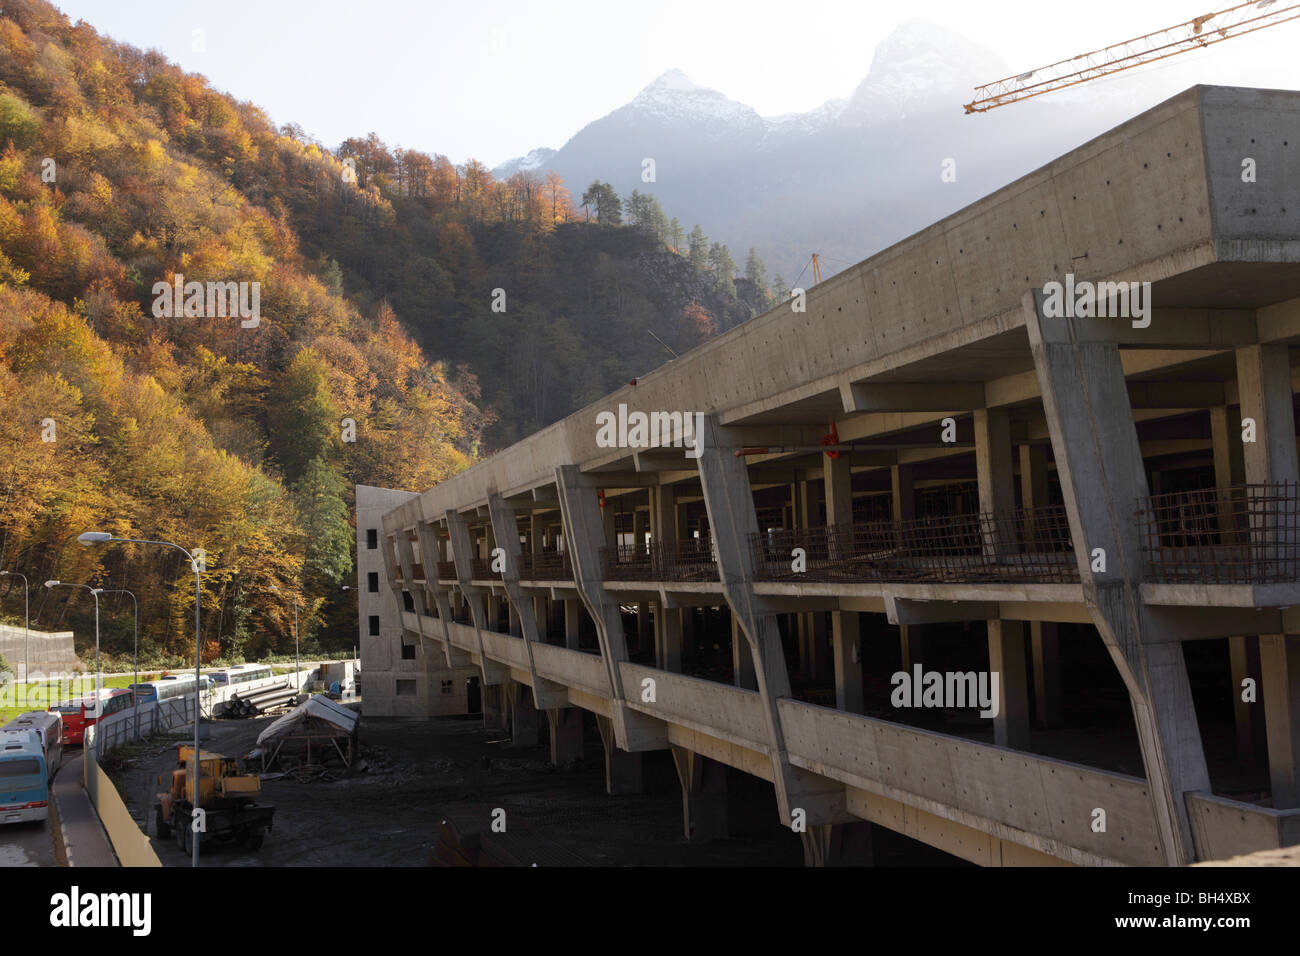 Construction of Olympic venues in Sochi, Russia Stock Photo